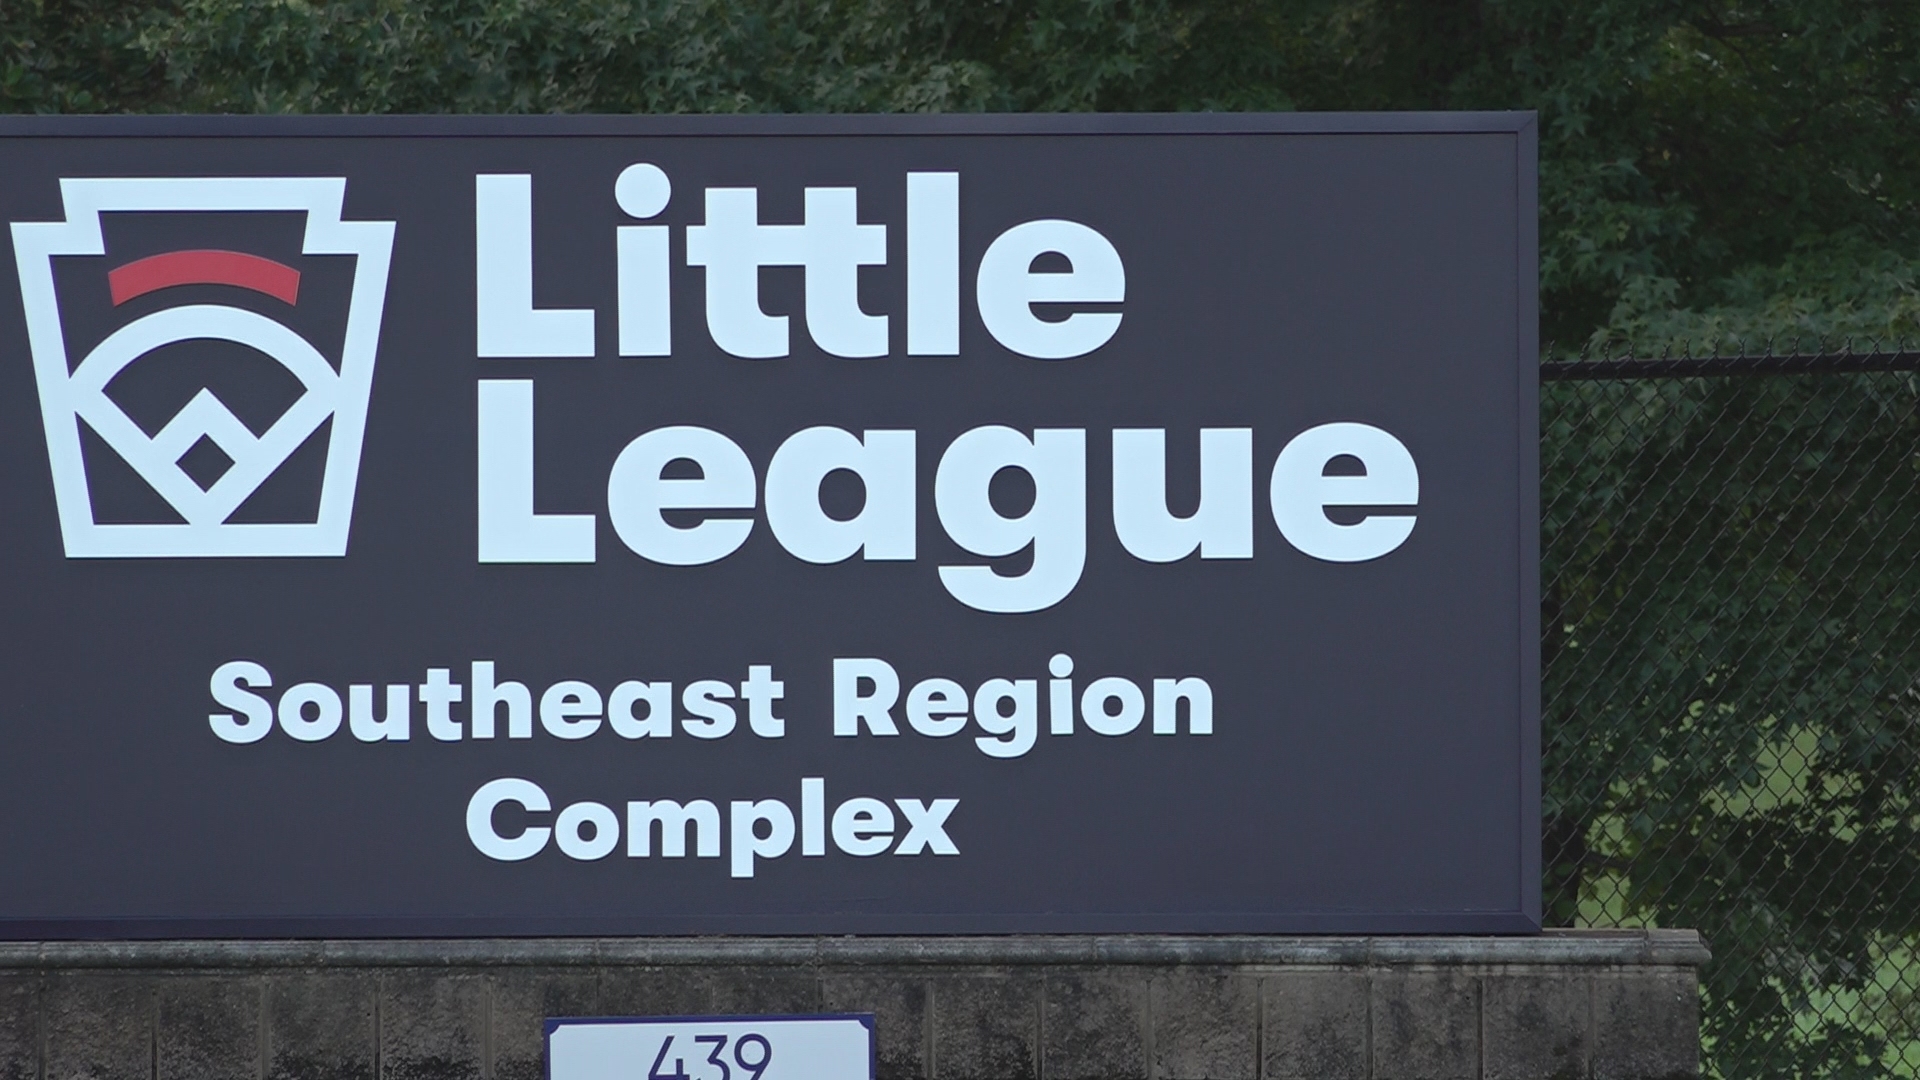 Local businesses say they've been very happy with the traffic from the families visiting as part of the Little League Southeast Region Tournaments.